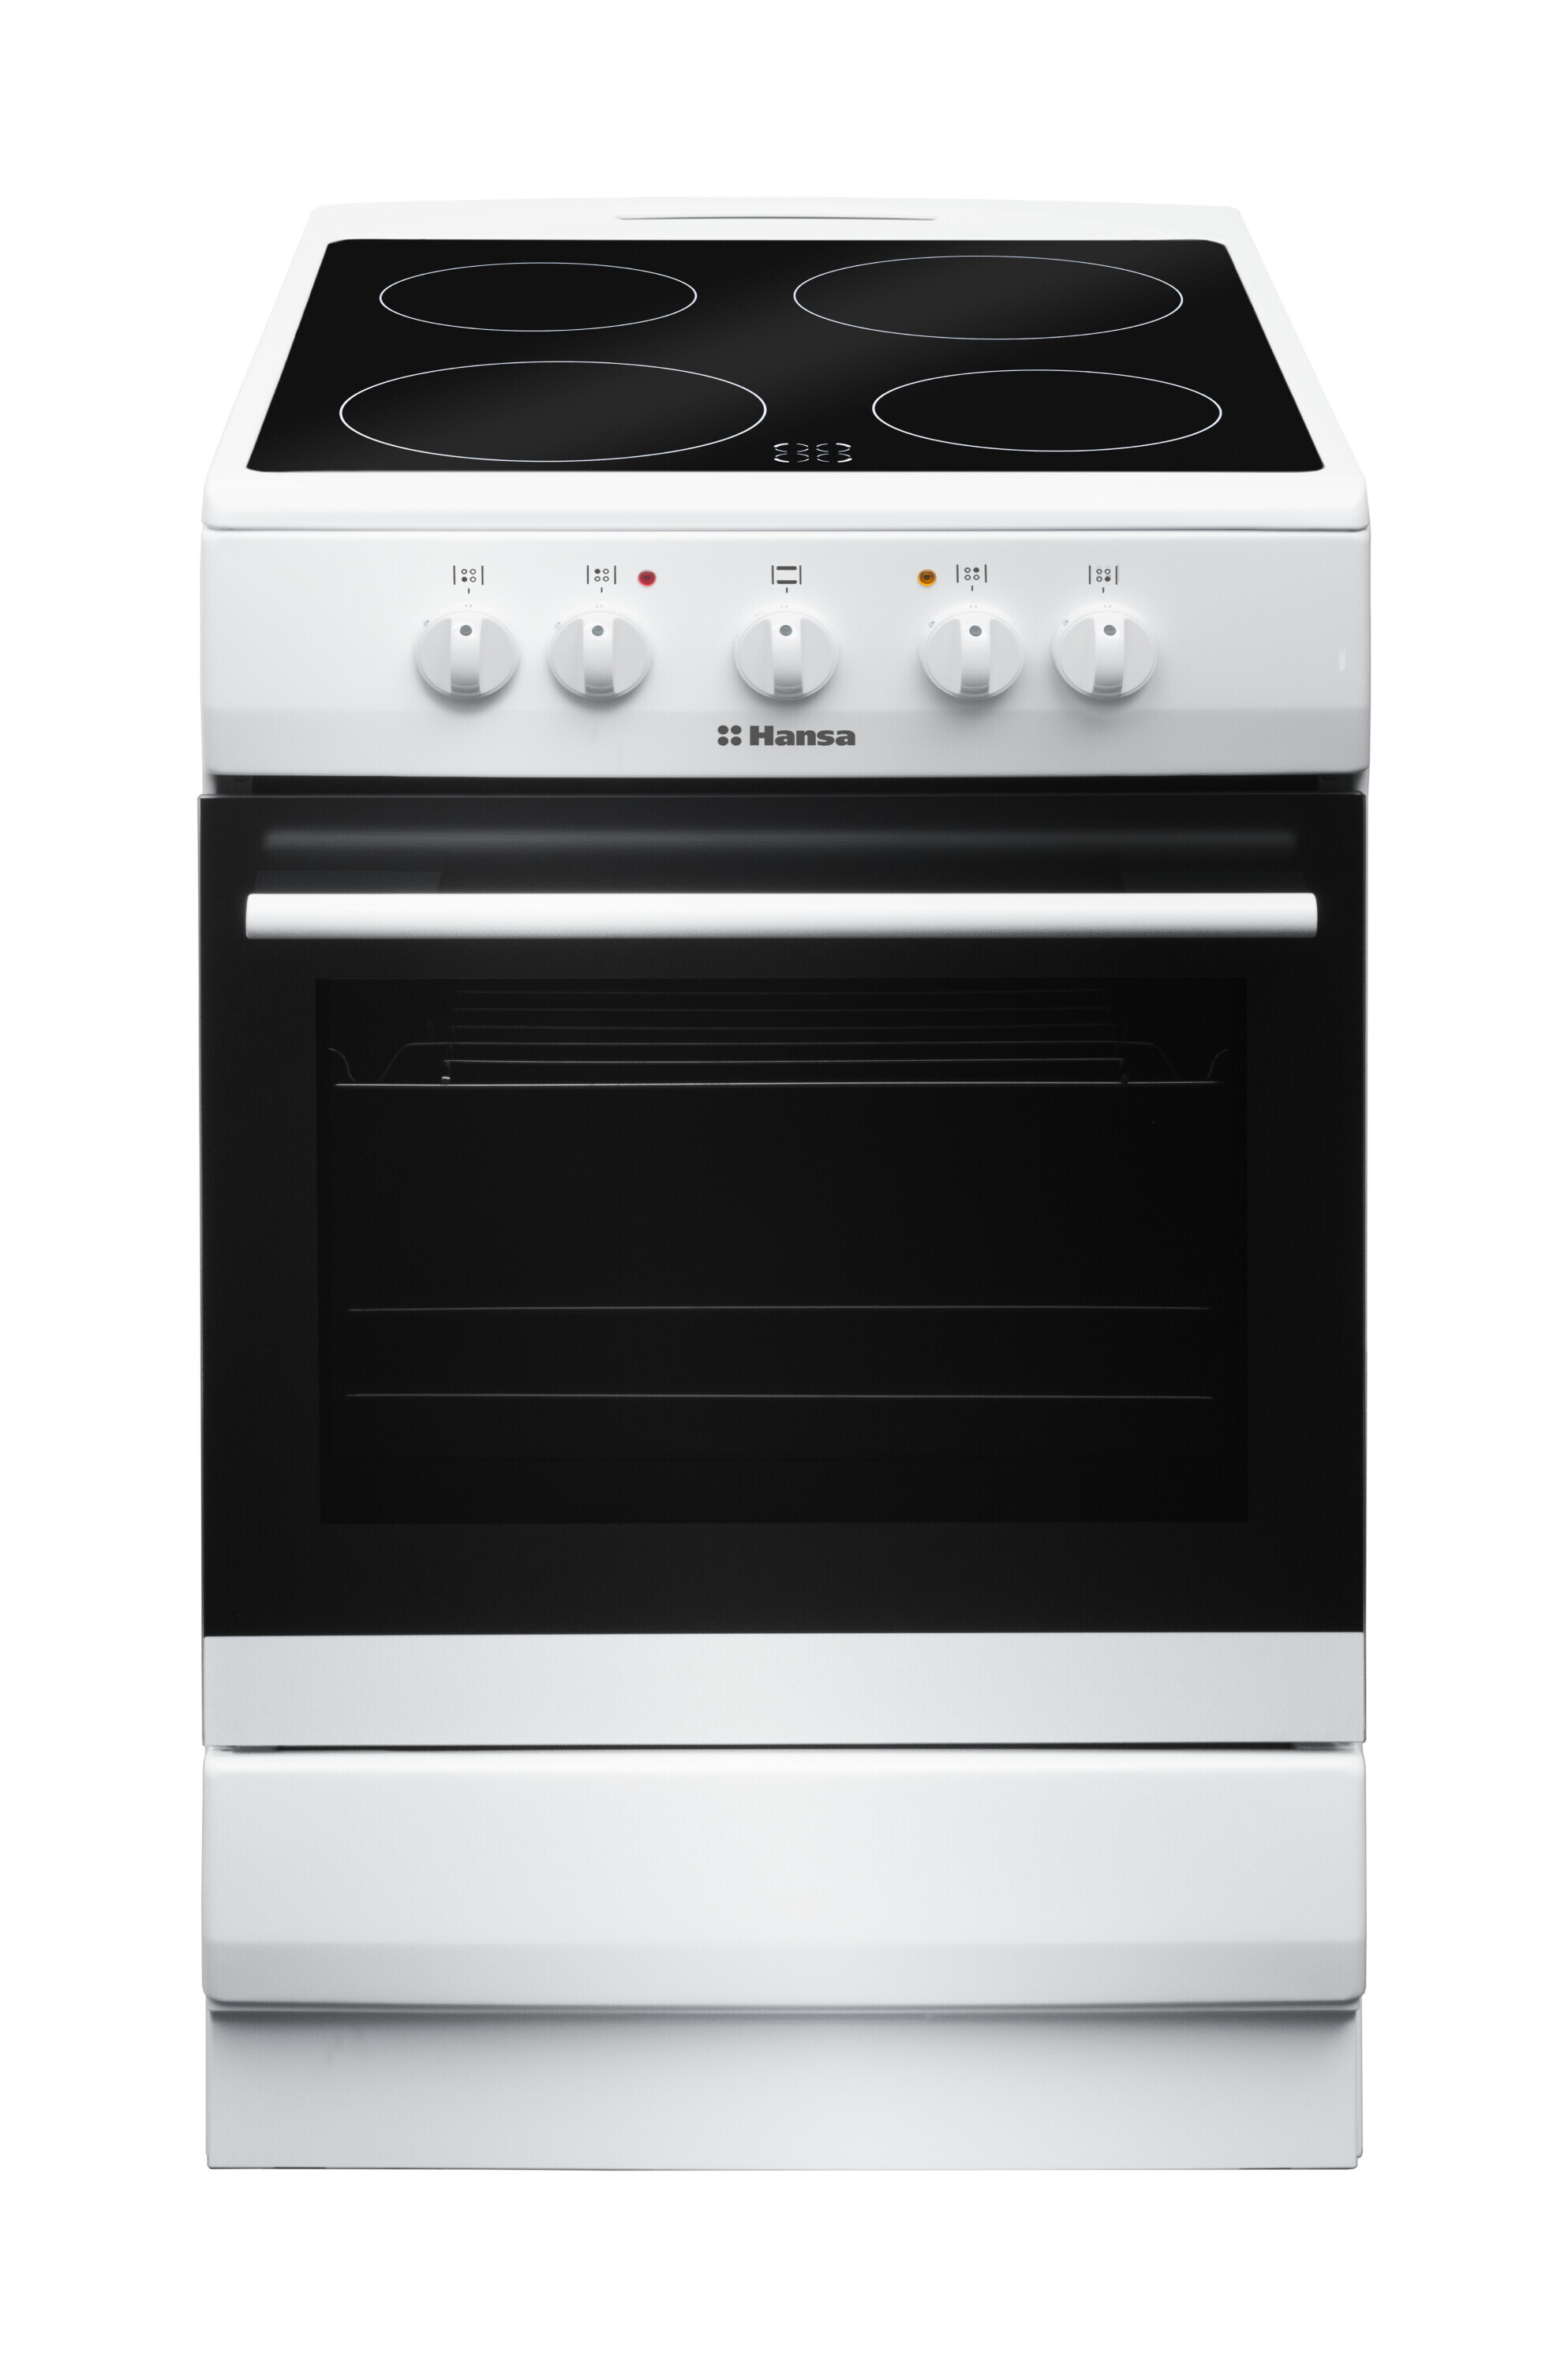 Freestanding cooker with ceramic hob